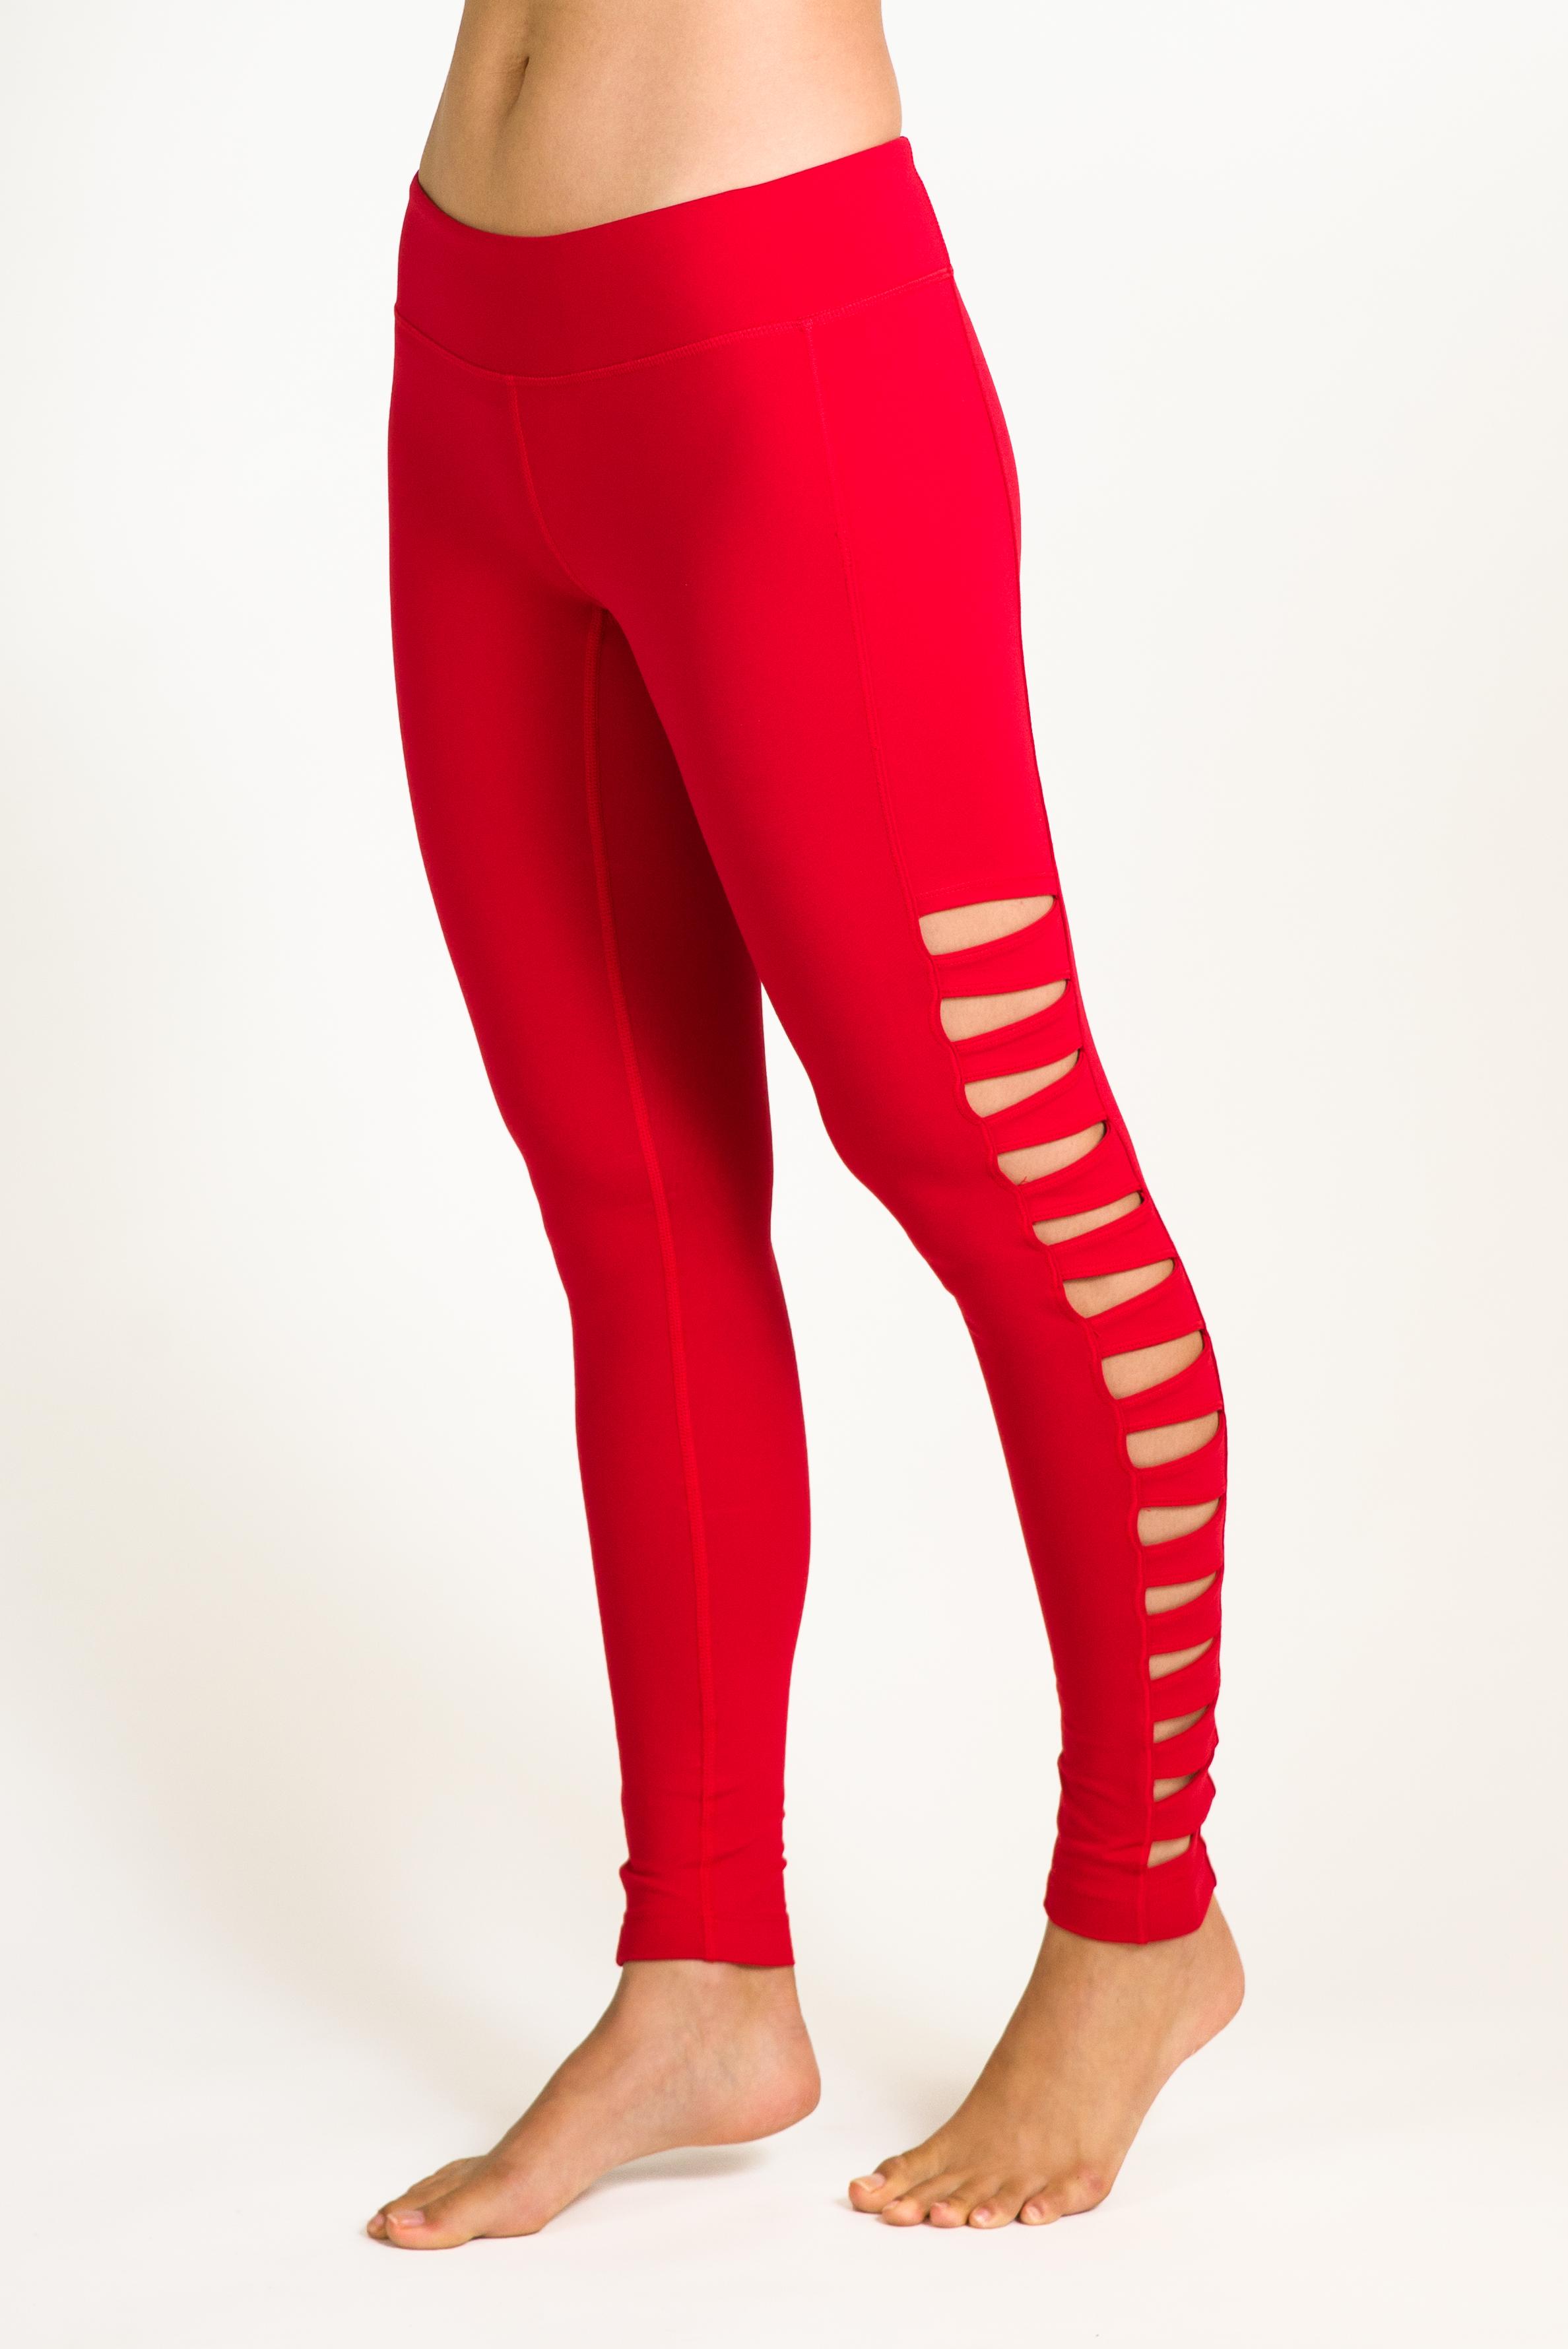 The Warrior Tough Cut Tights in Red